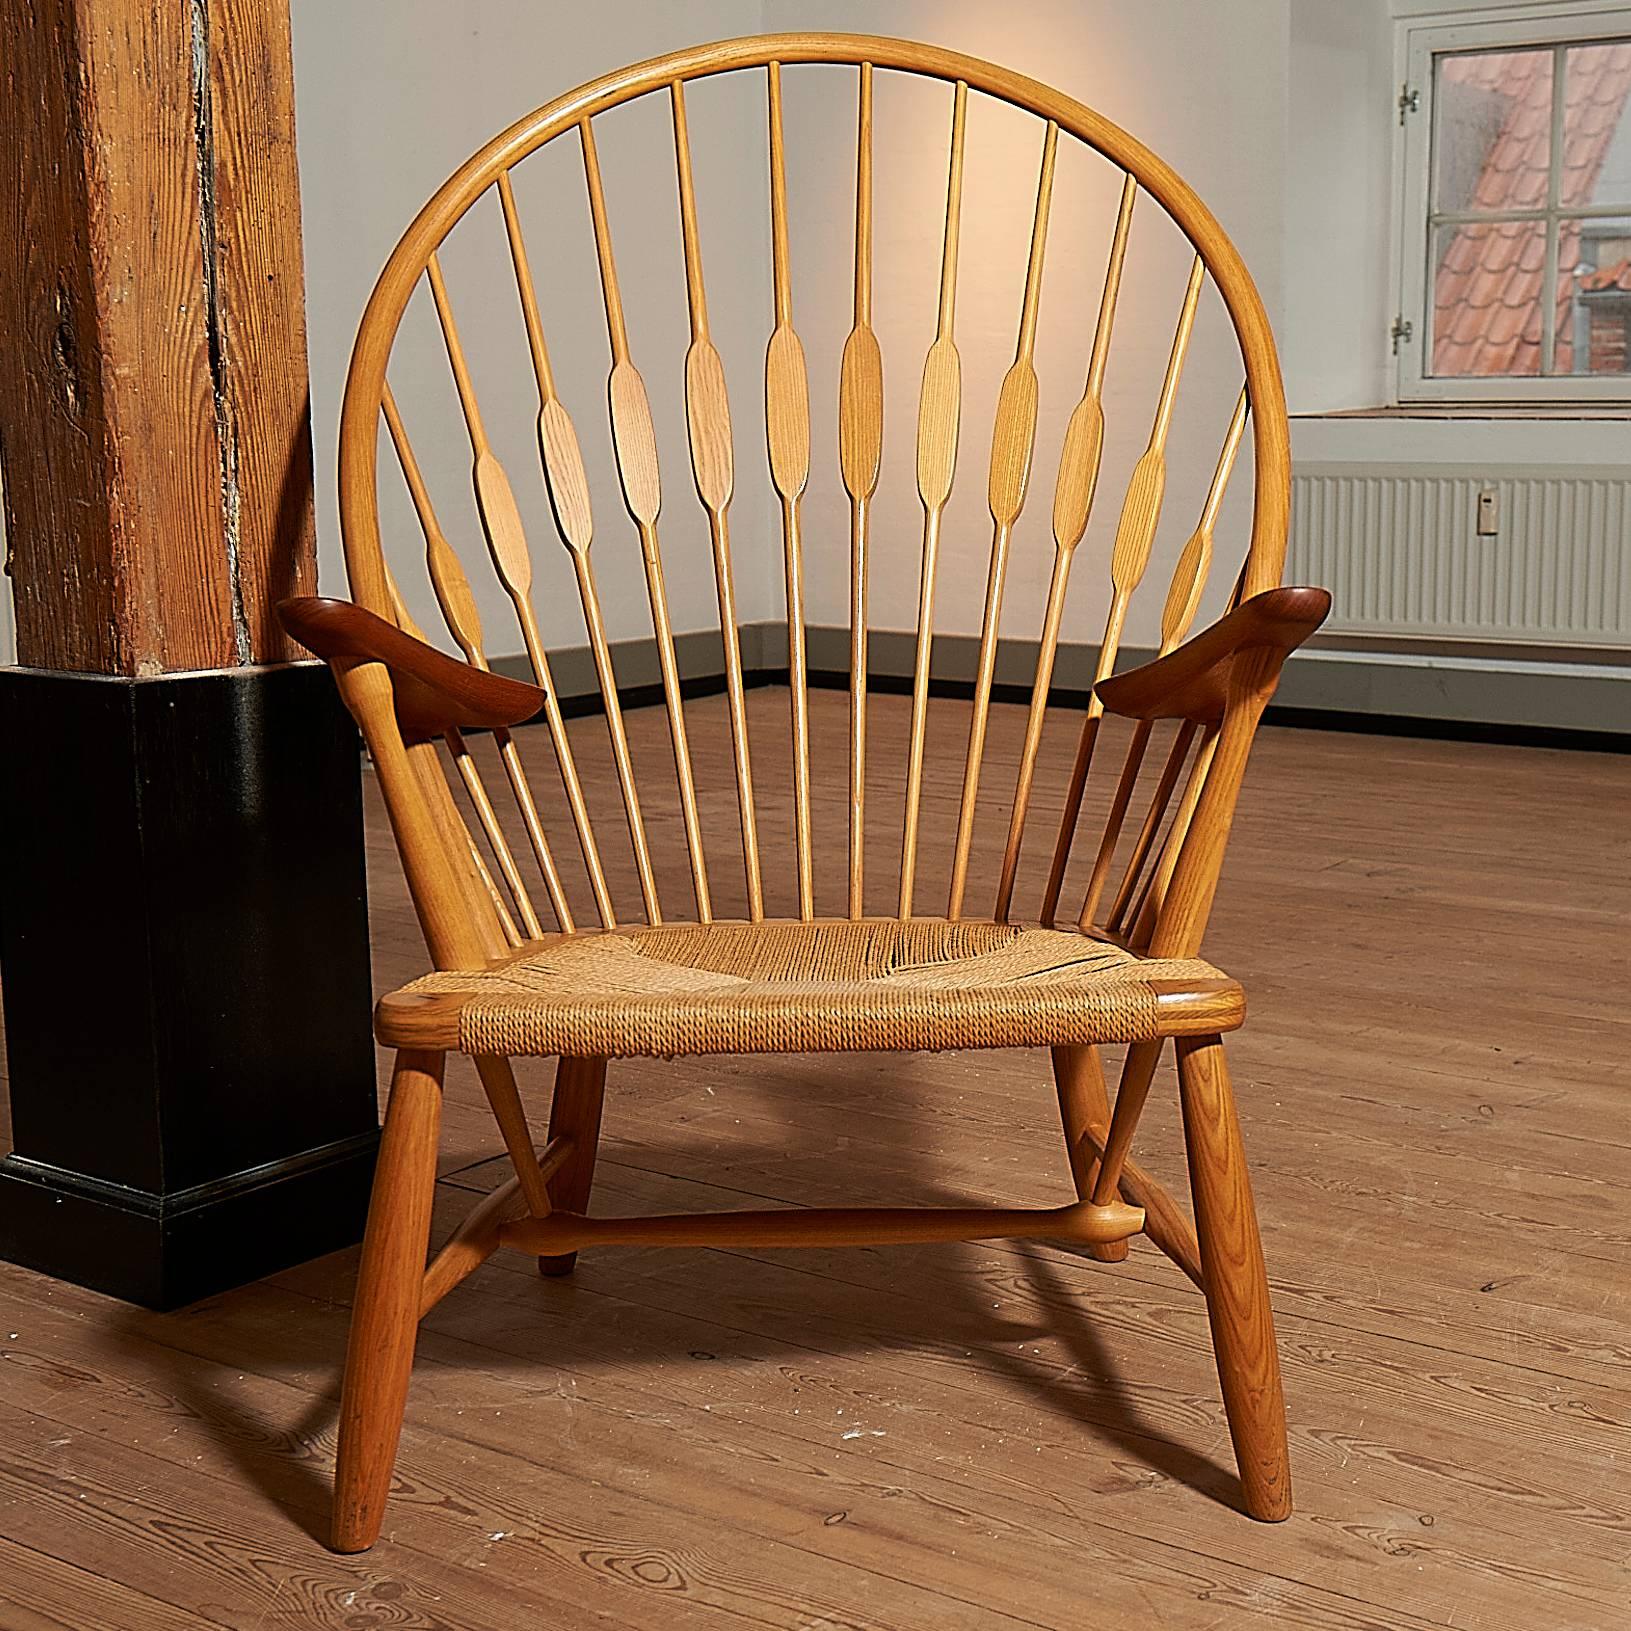 An original Peacock chair from the 1970s in oak and with arms of teak. The seat is of papercord. The chair is in a very good condition.